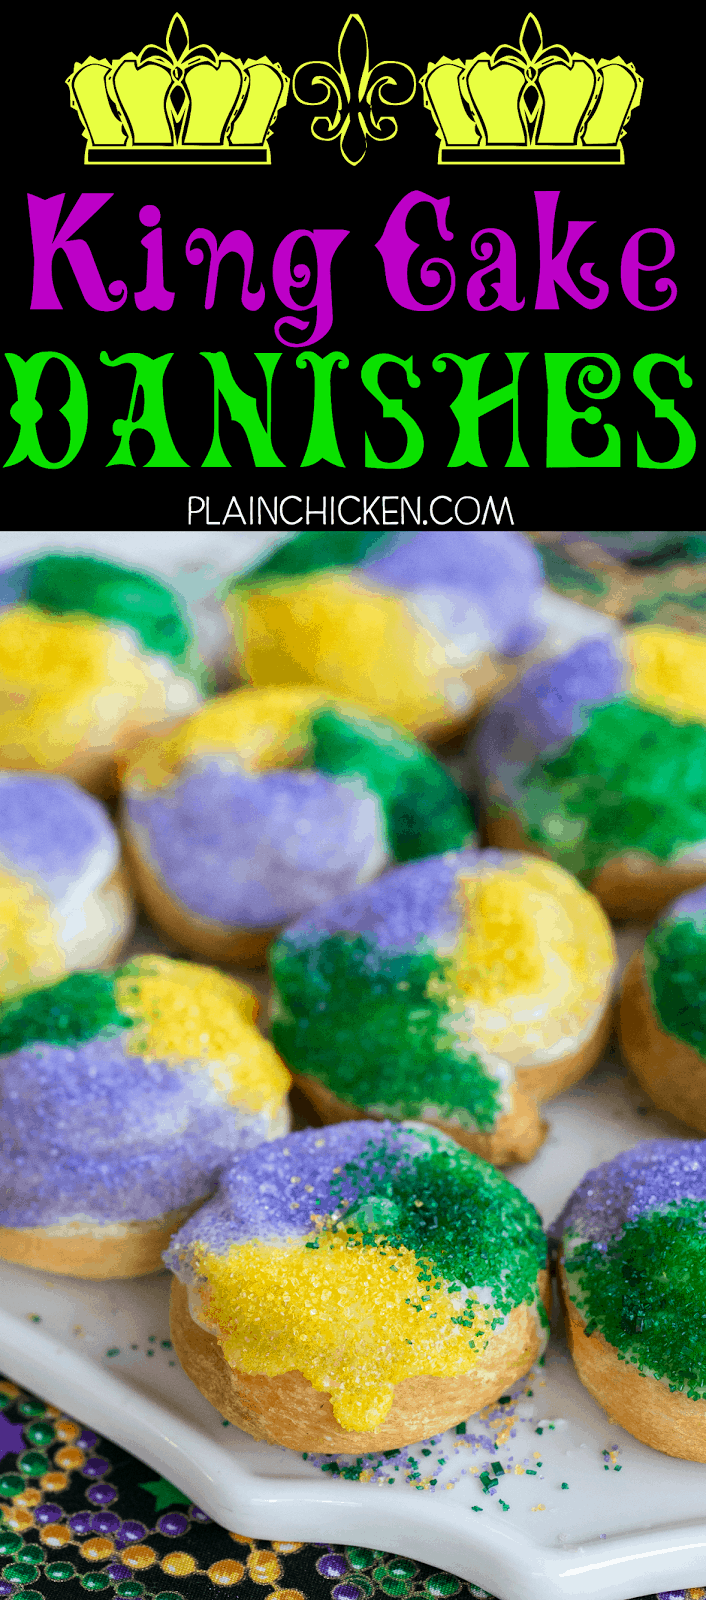 King Cake Danishes - only 5 ingredients! These things are SOOOO good!!! Perfect for Mardi Gras! Crescent rolls, cinnamon, cream cheese, powdered sugar and milk. Can make ahead of time and reheat for Fat Tuesday breakfast!